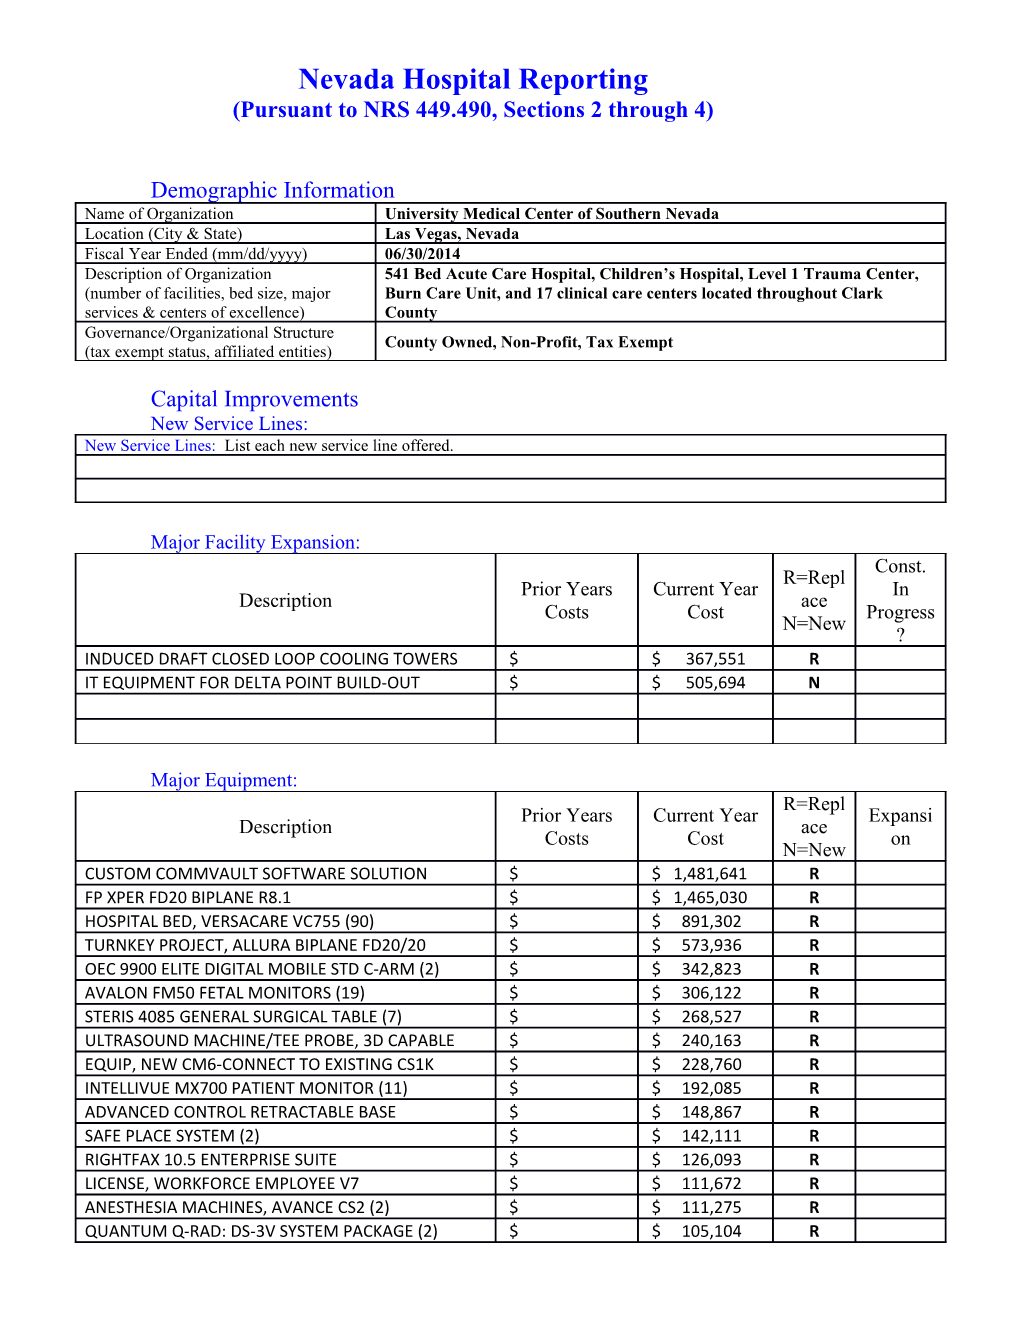 Nevada Community Benefit Reporting Template